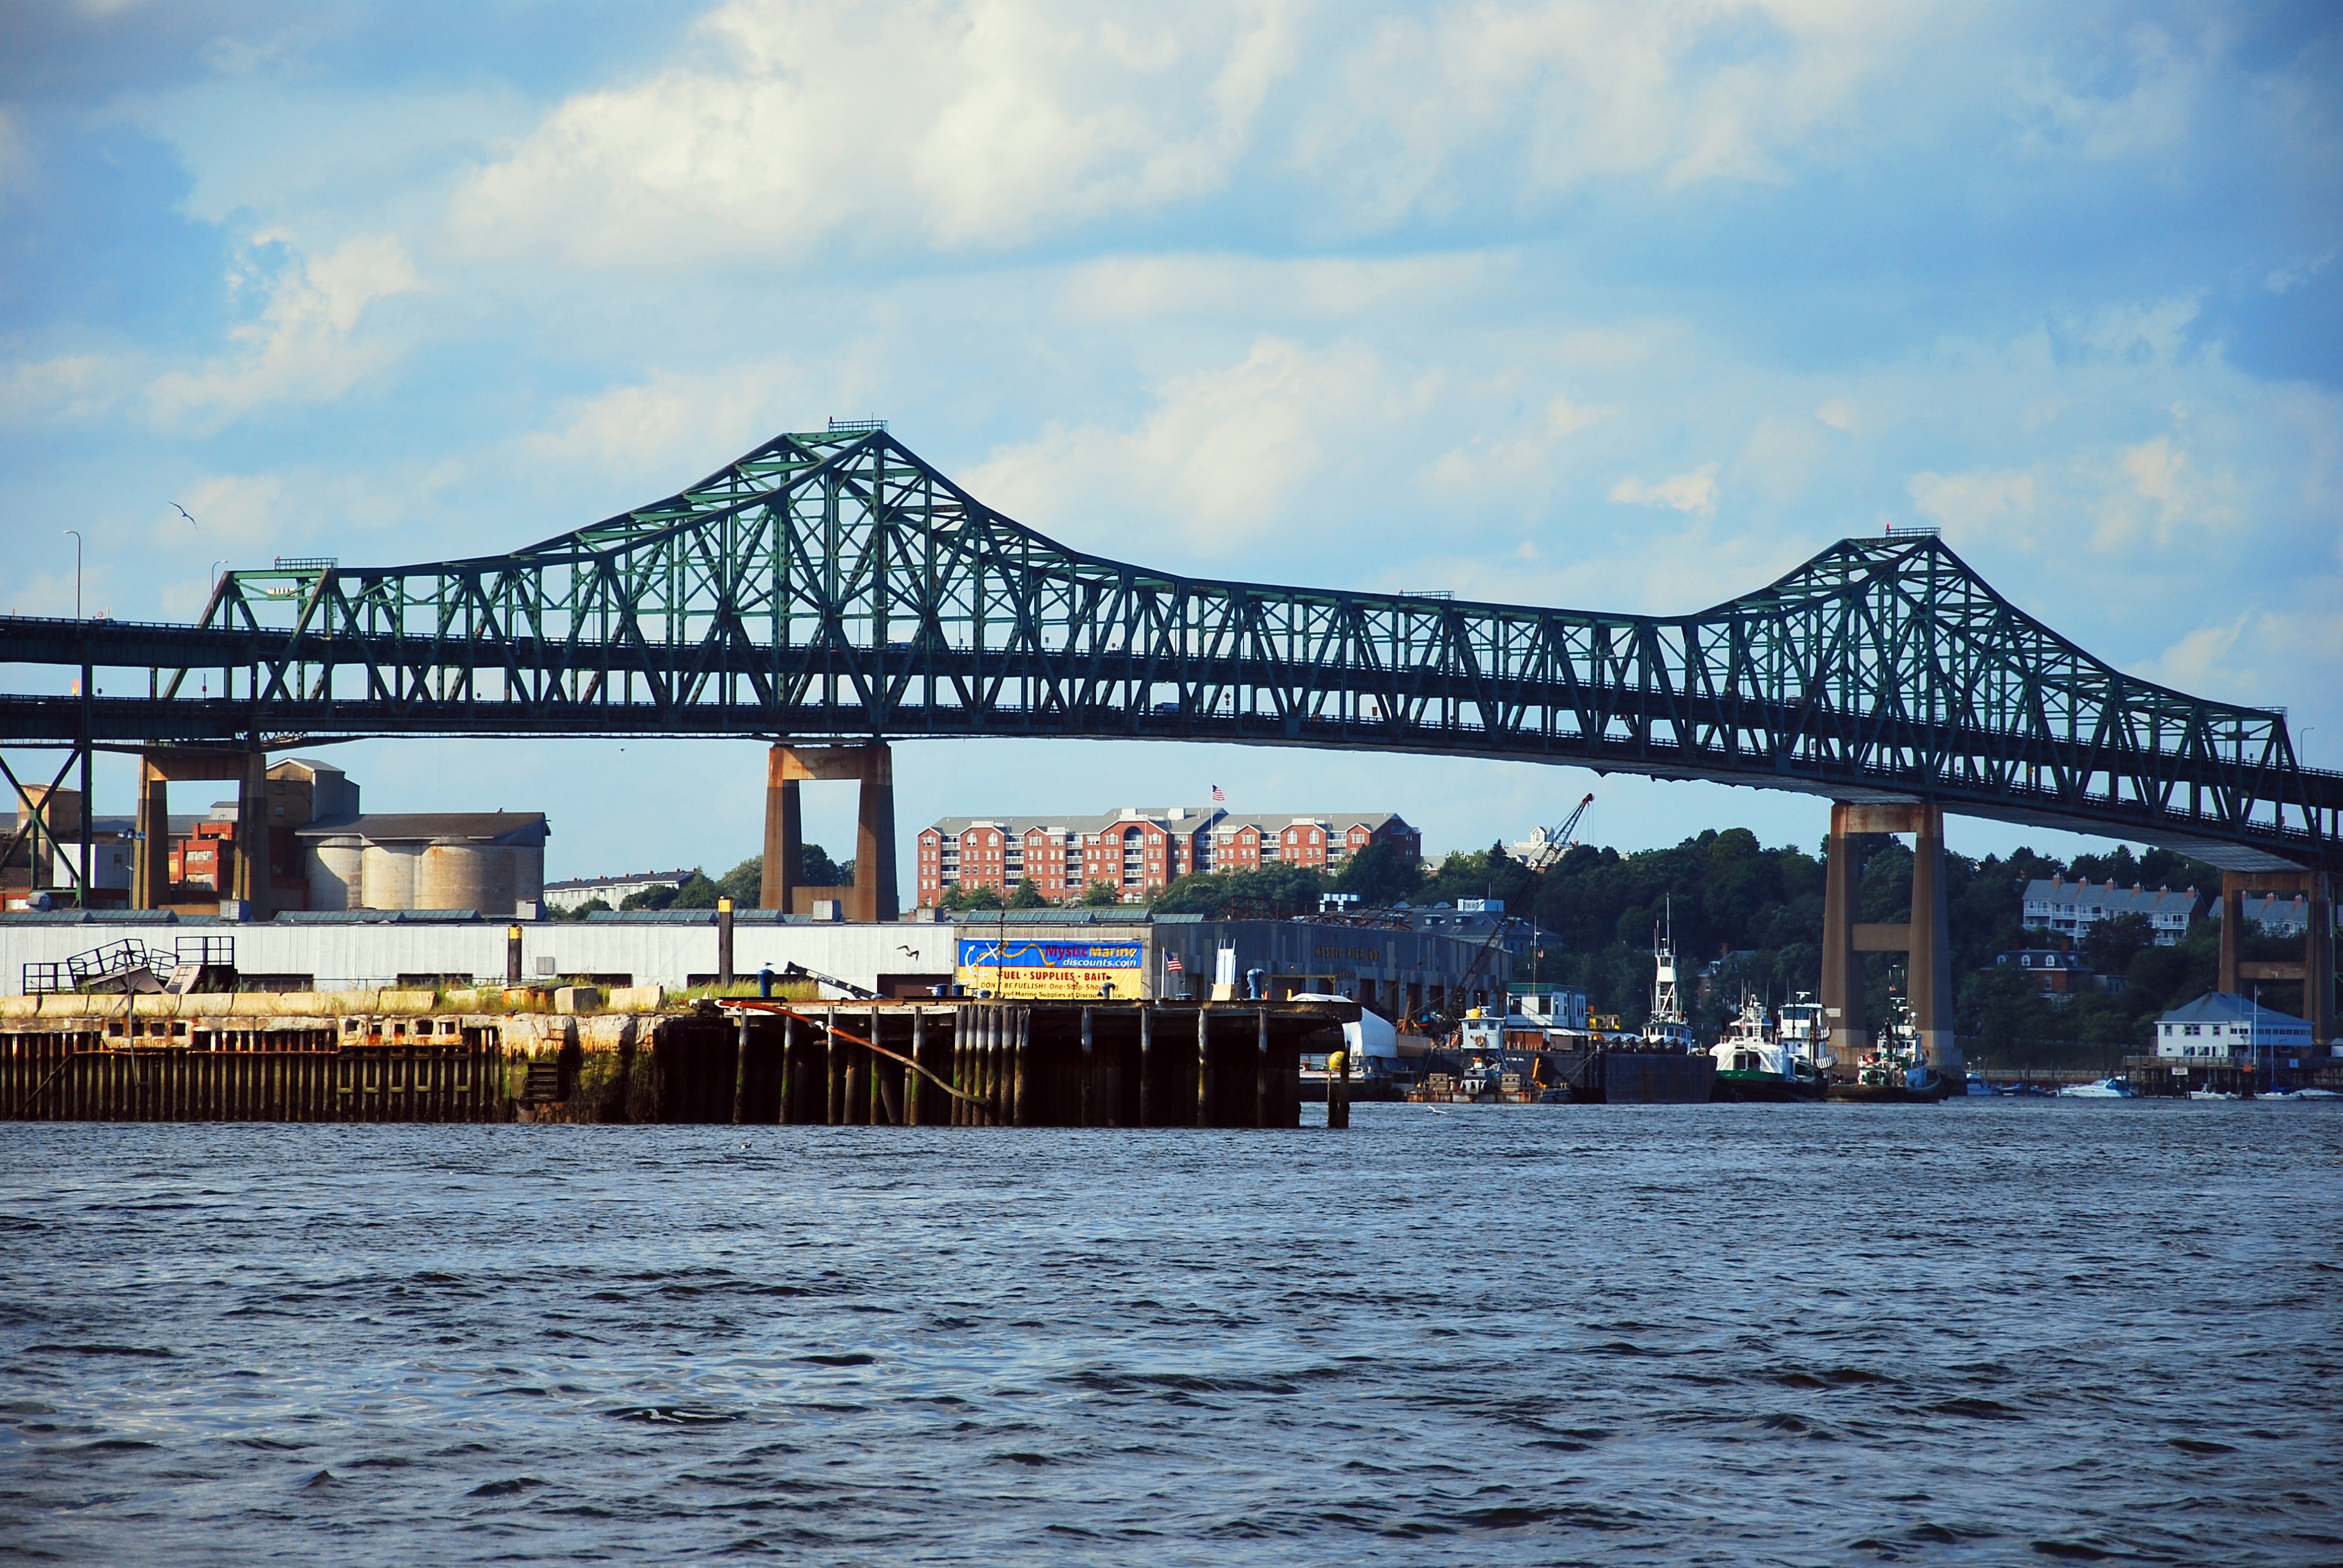 A large bridge painted green spans a choppy body of water above some tugboats and wharves.